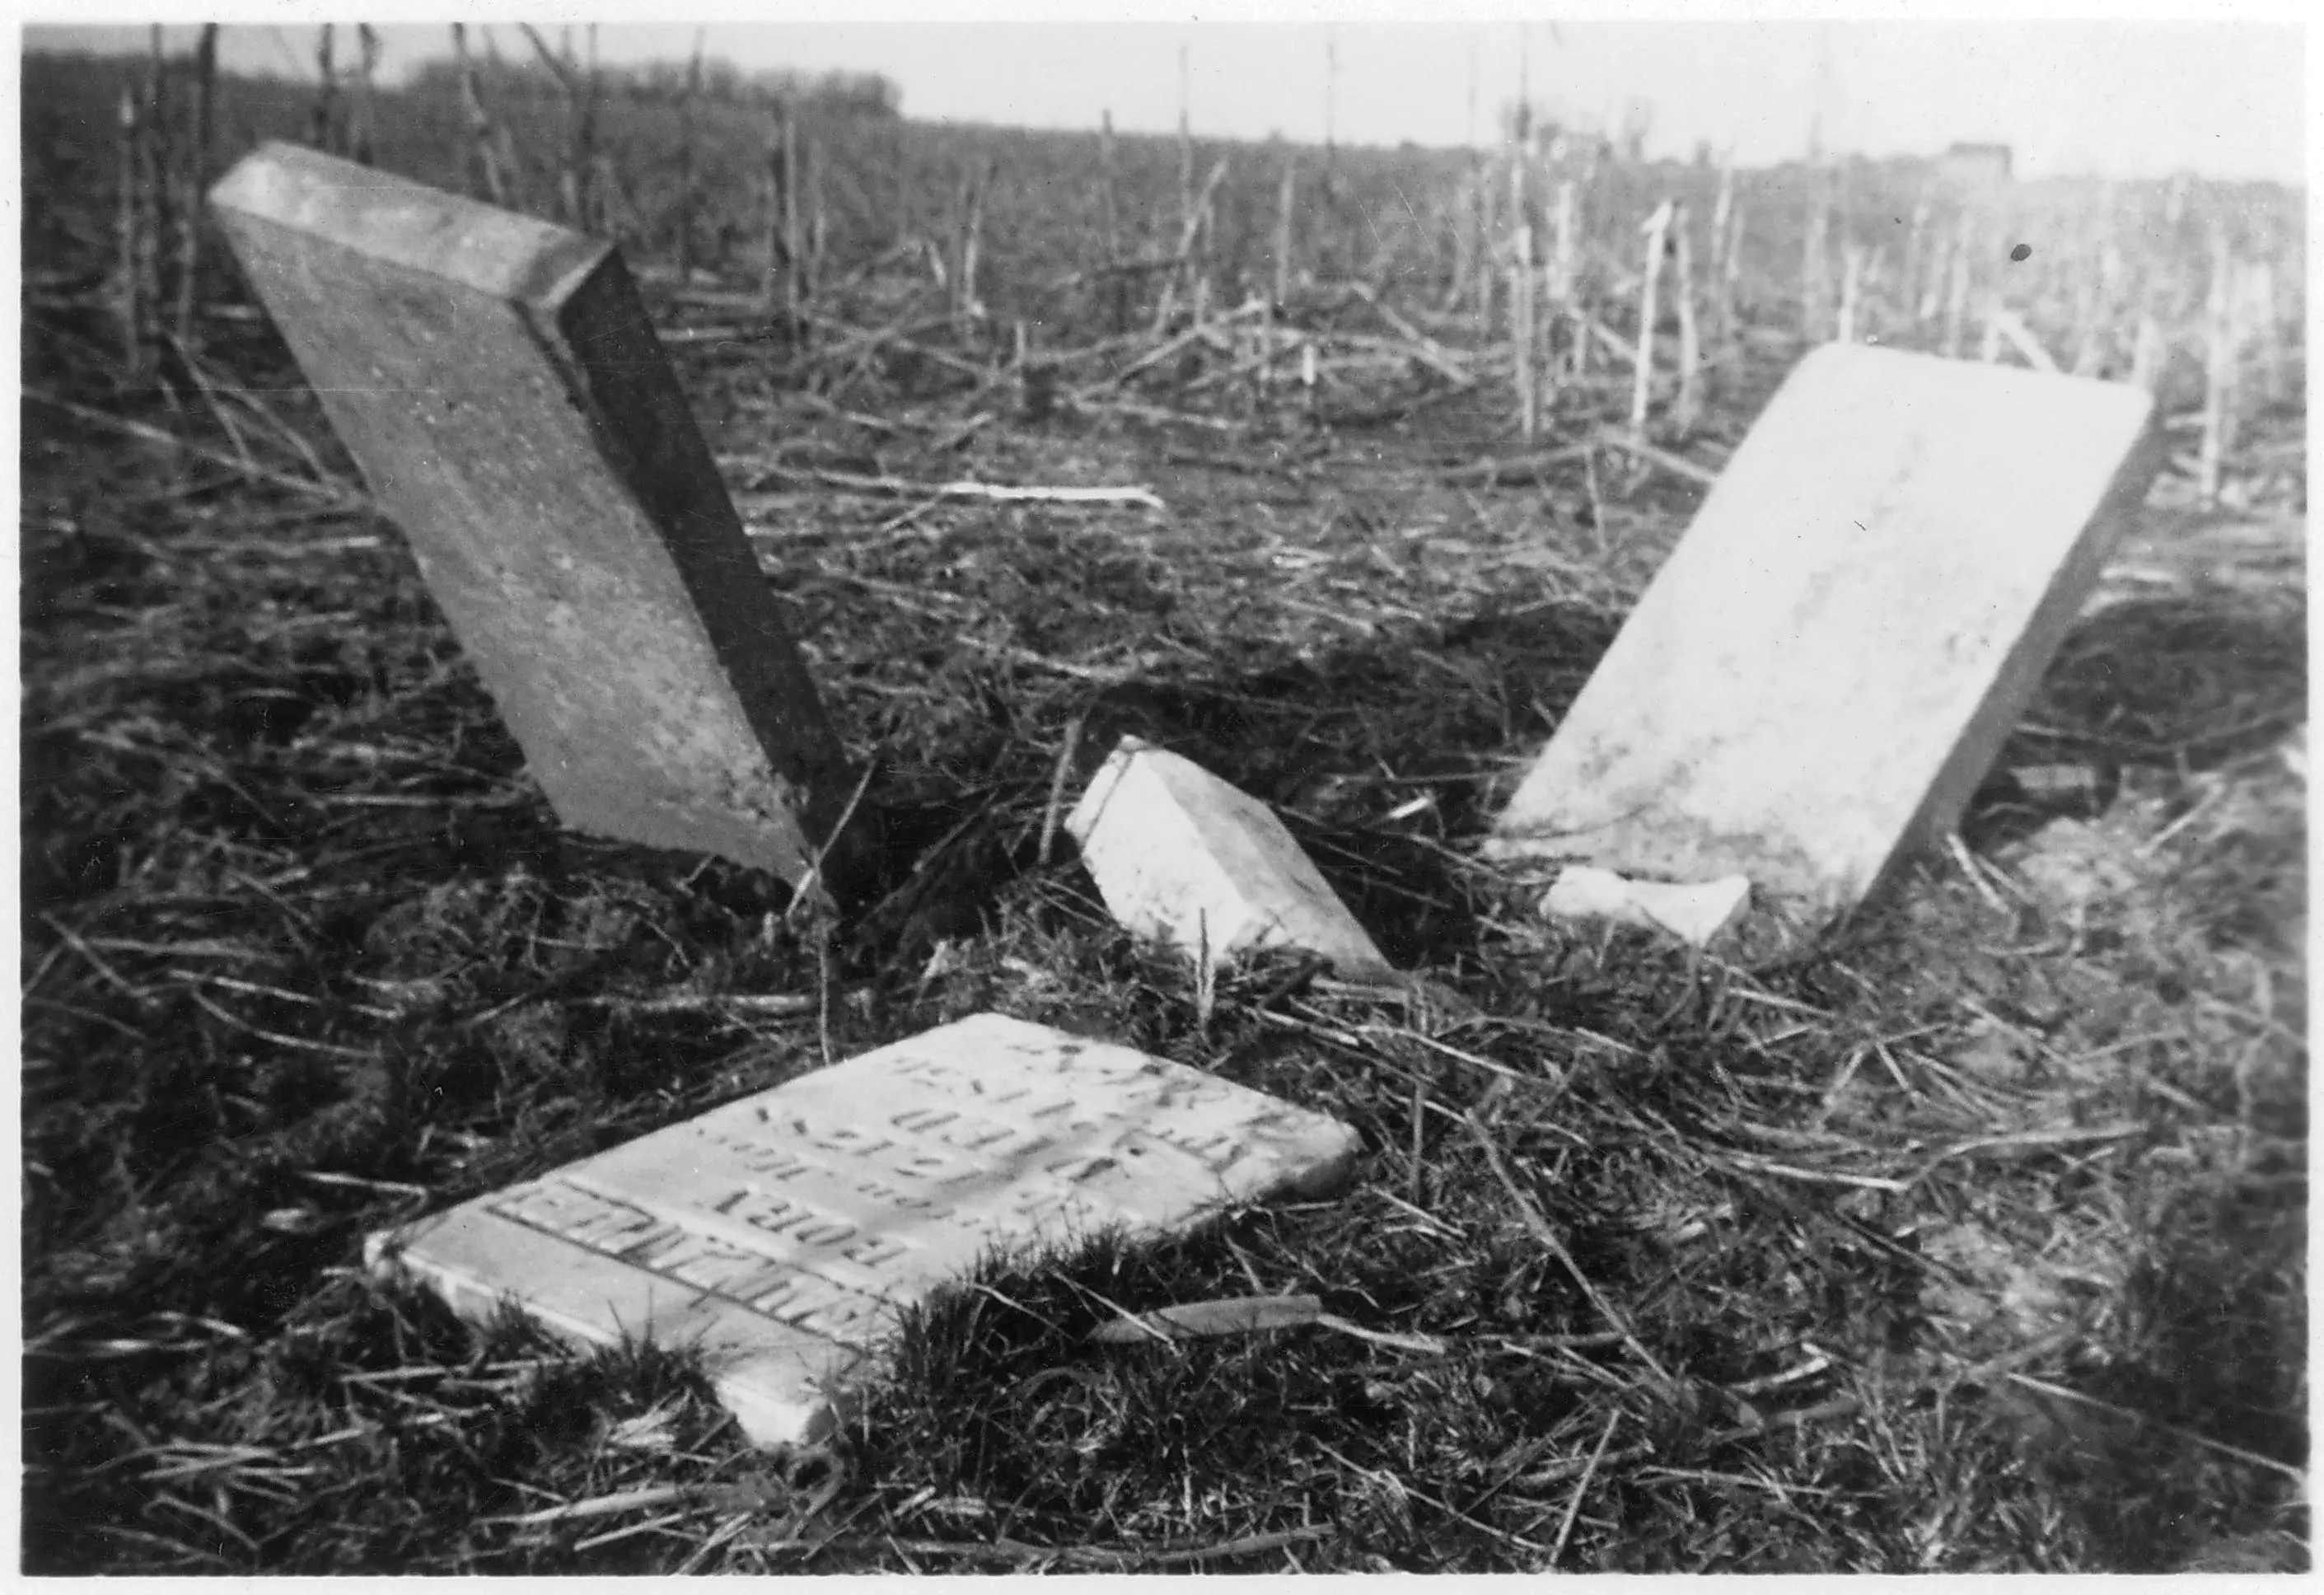 Black and white photo of crooked and damaged headstones, amid tall unkempt grass.